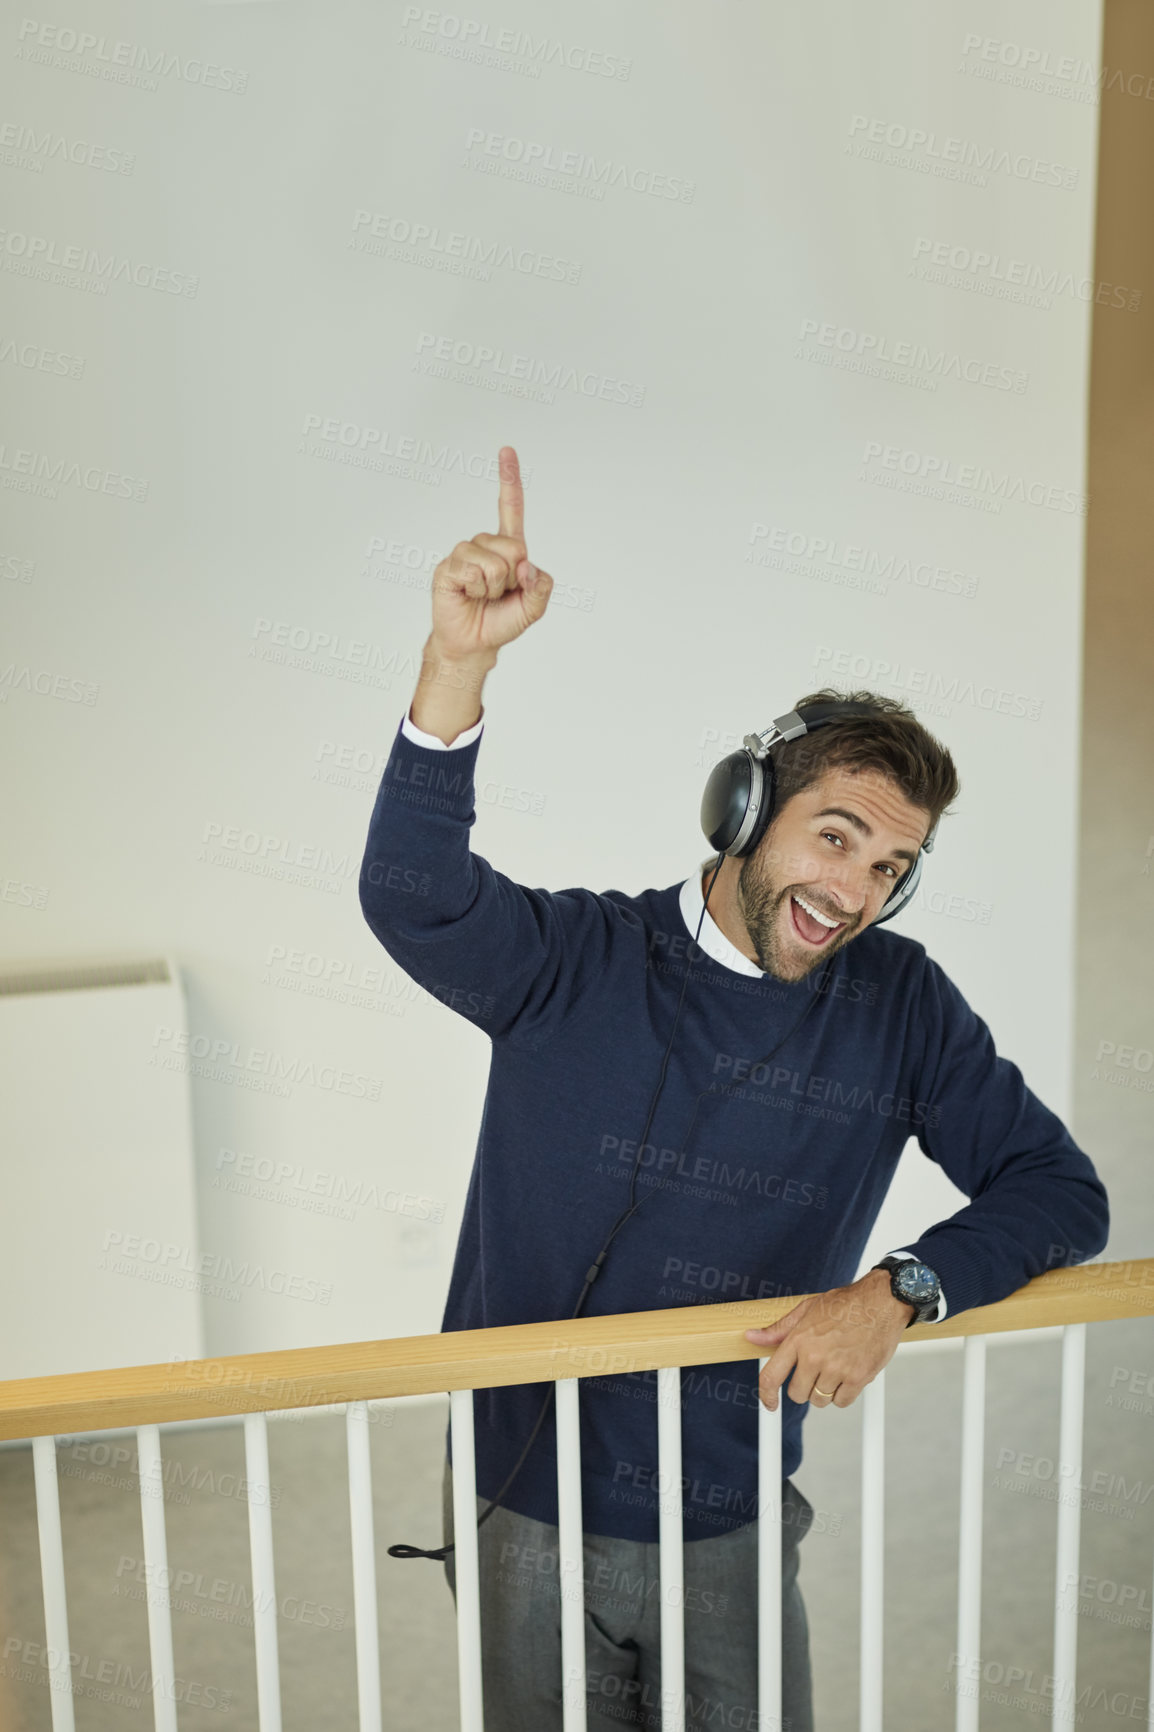 Buy stock photo Portrait of a young businessman wearing headphones and pointing up in an office